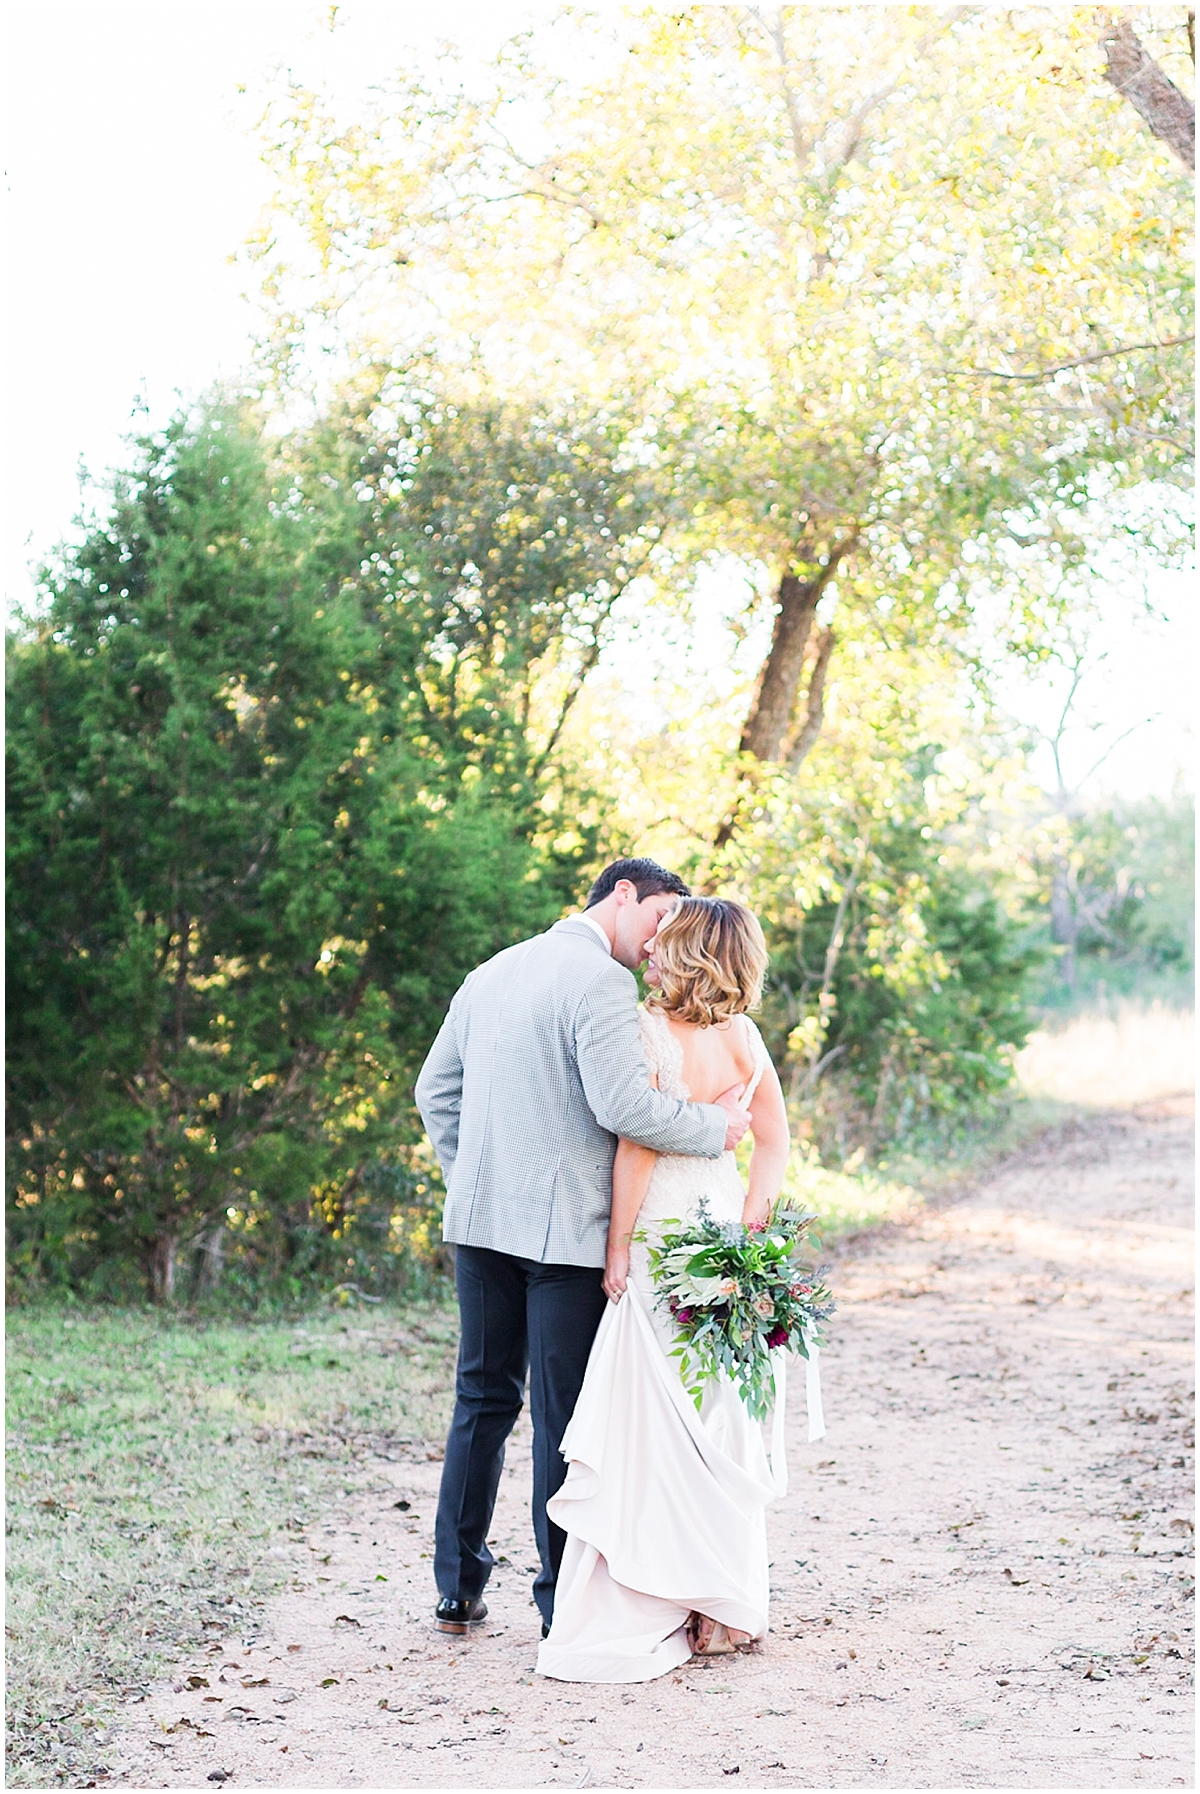 a-classic-modern-black-and-white-wedding-with-gold-accents-inspirational-shoot-at-pecan-springs-ranch-by-allison-jeffers-wedding-photography-dripping-springs-wedding-photographer_0070